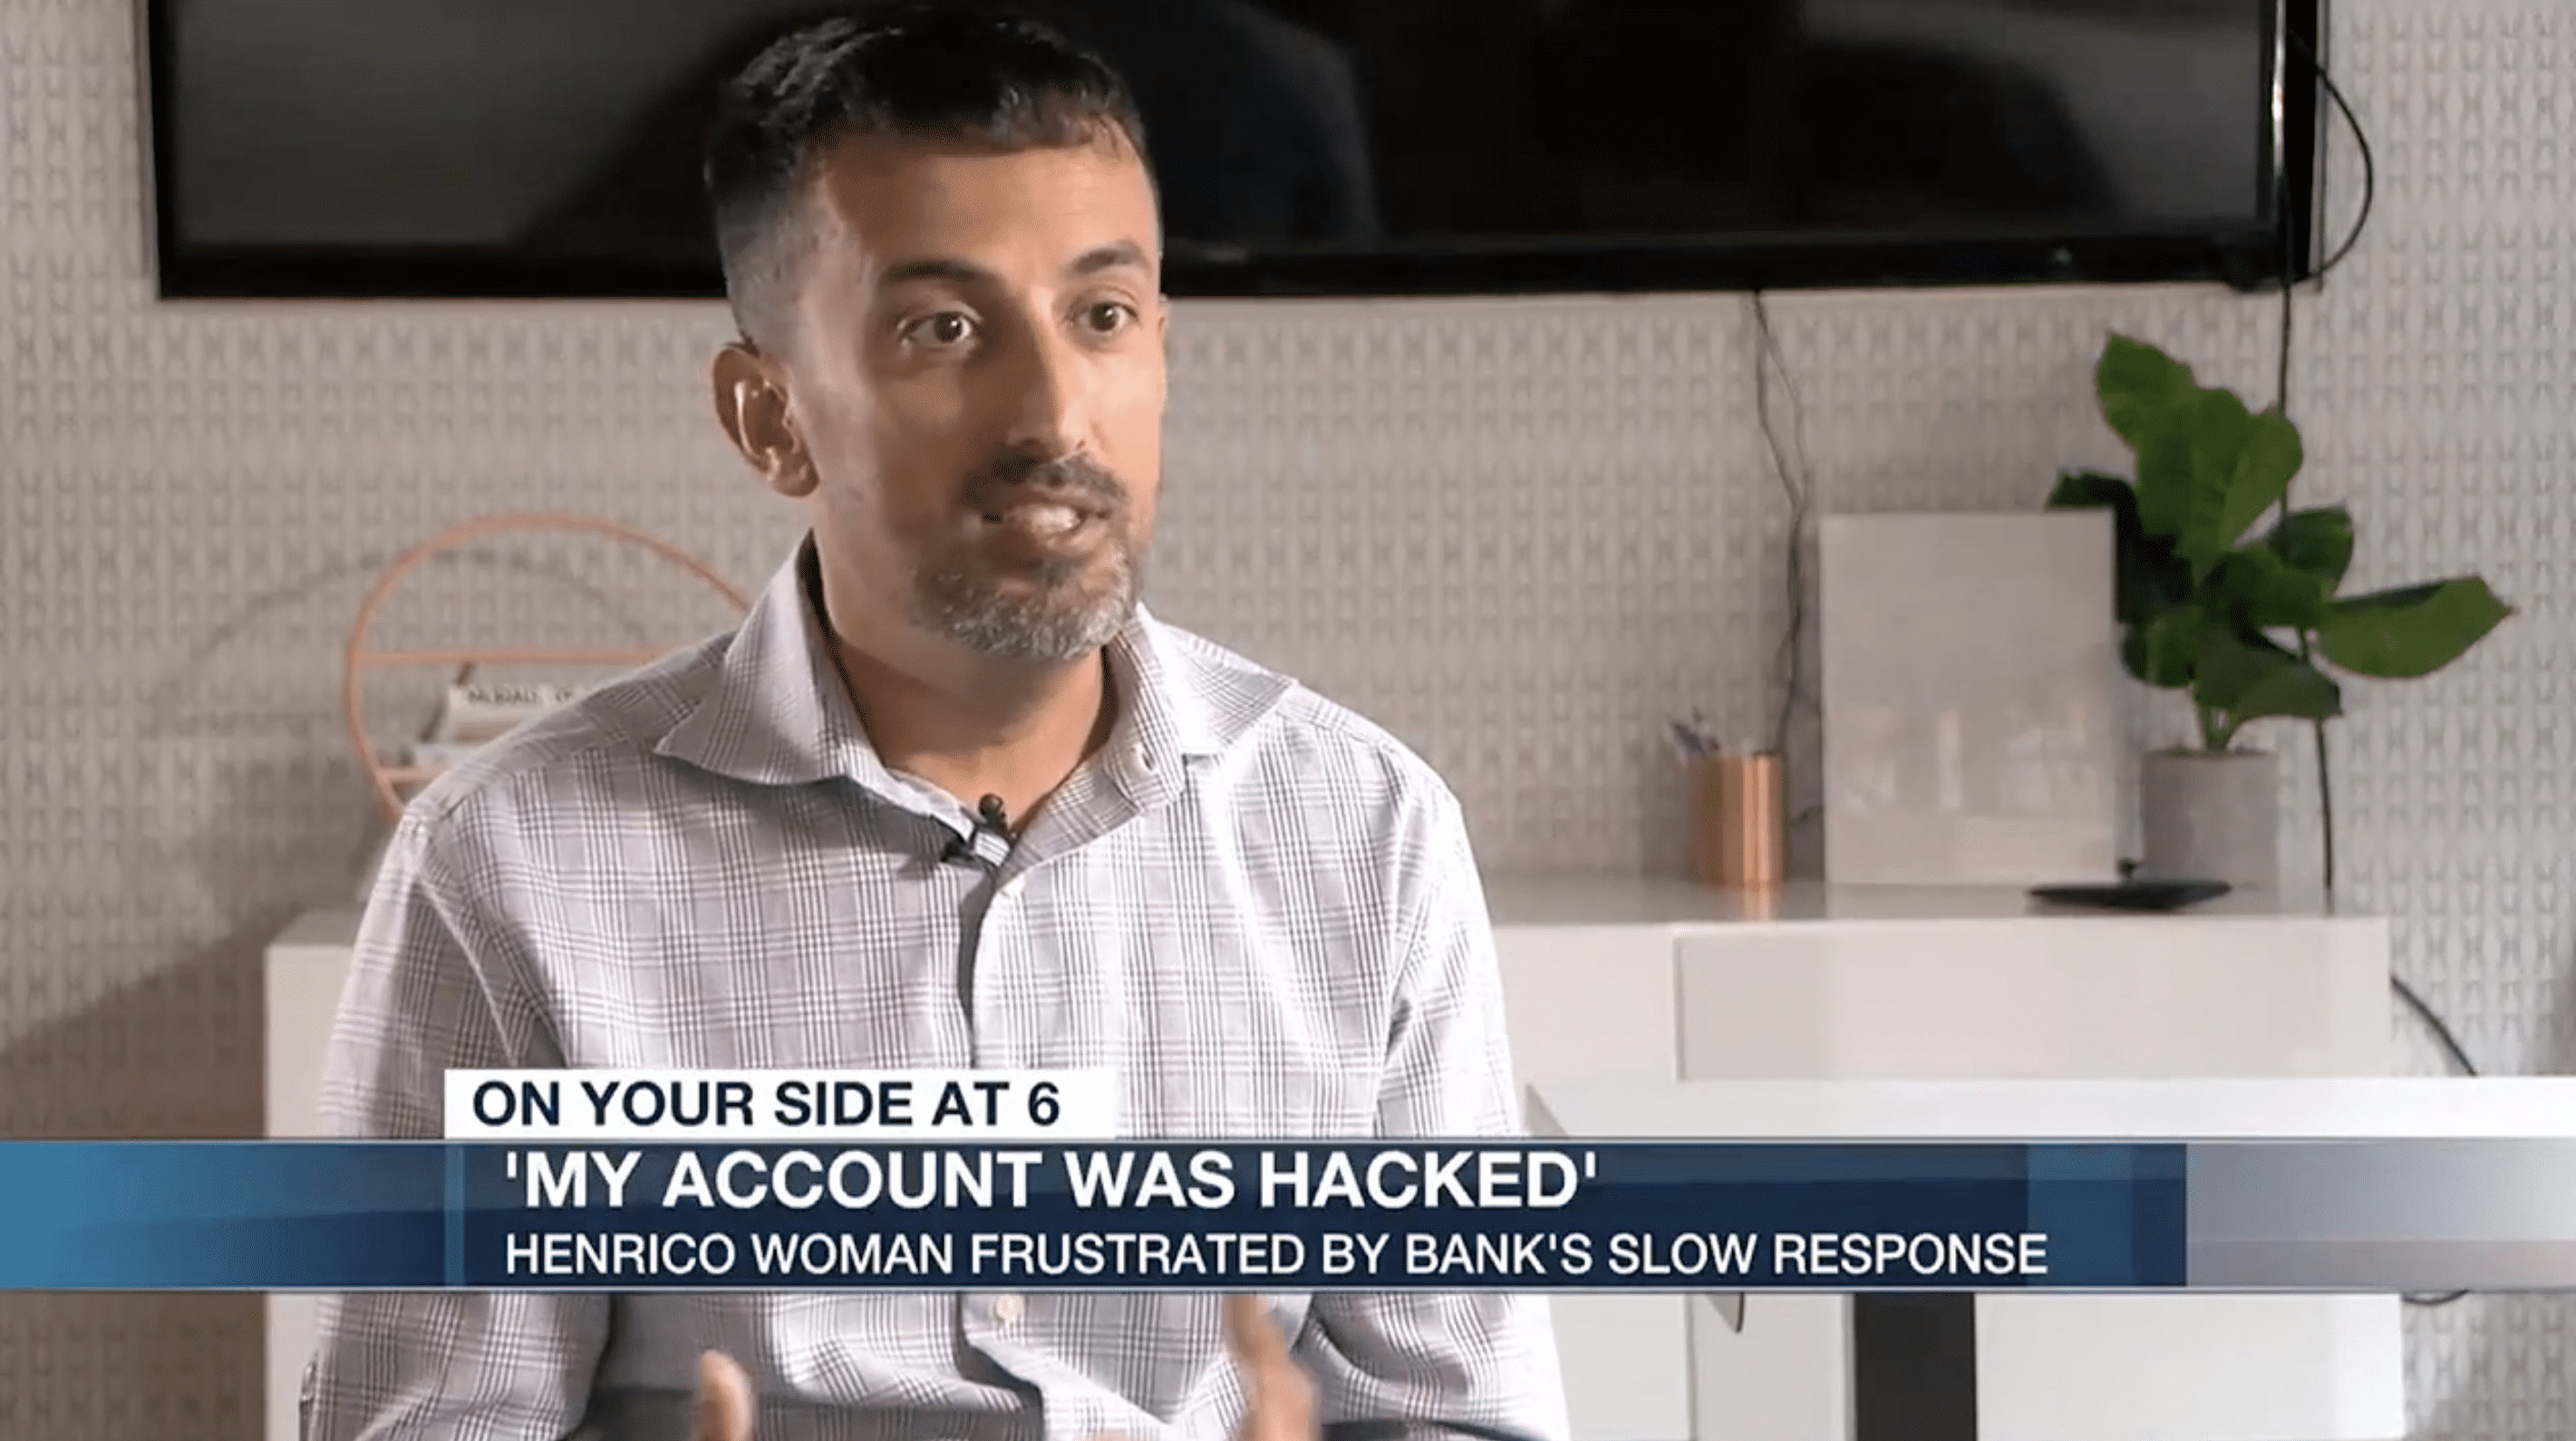 Woman's Account Was Hacked and Bank Promised to Refund Money but Then Delayed for 4 Weeks